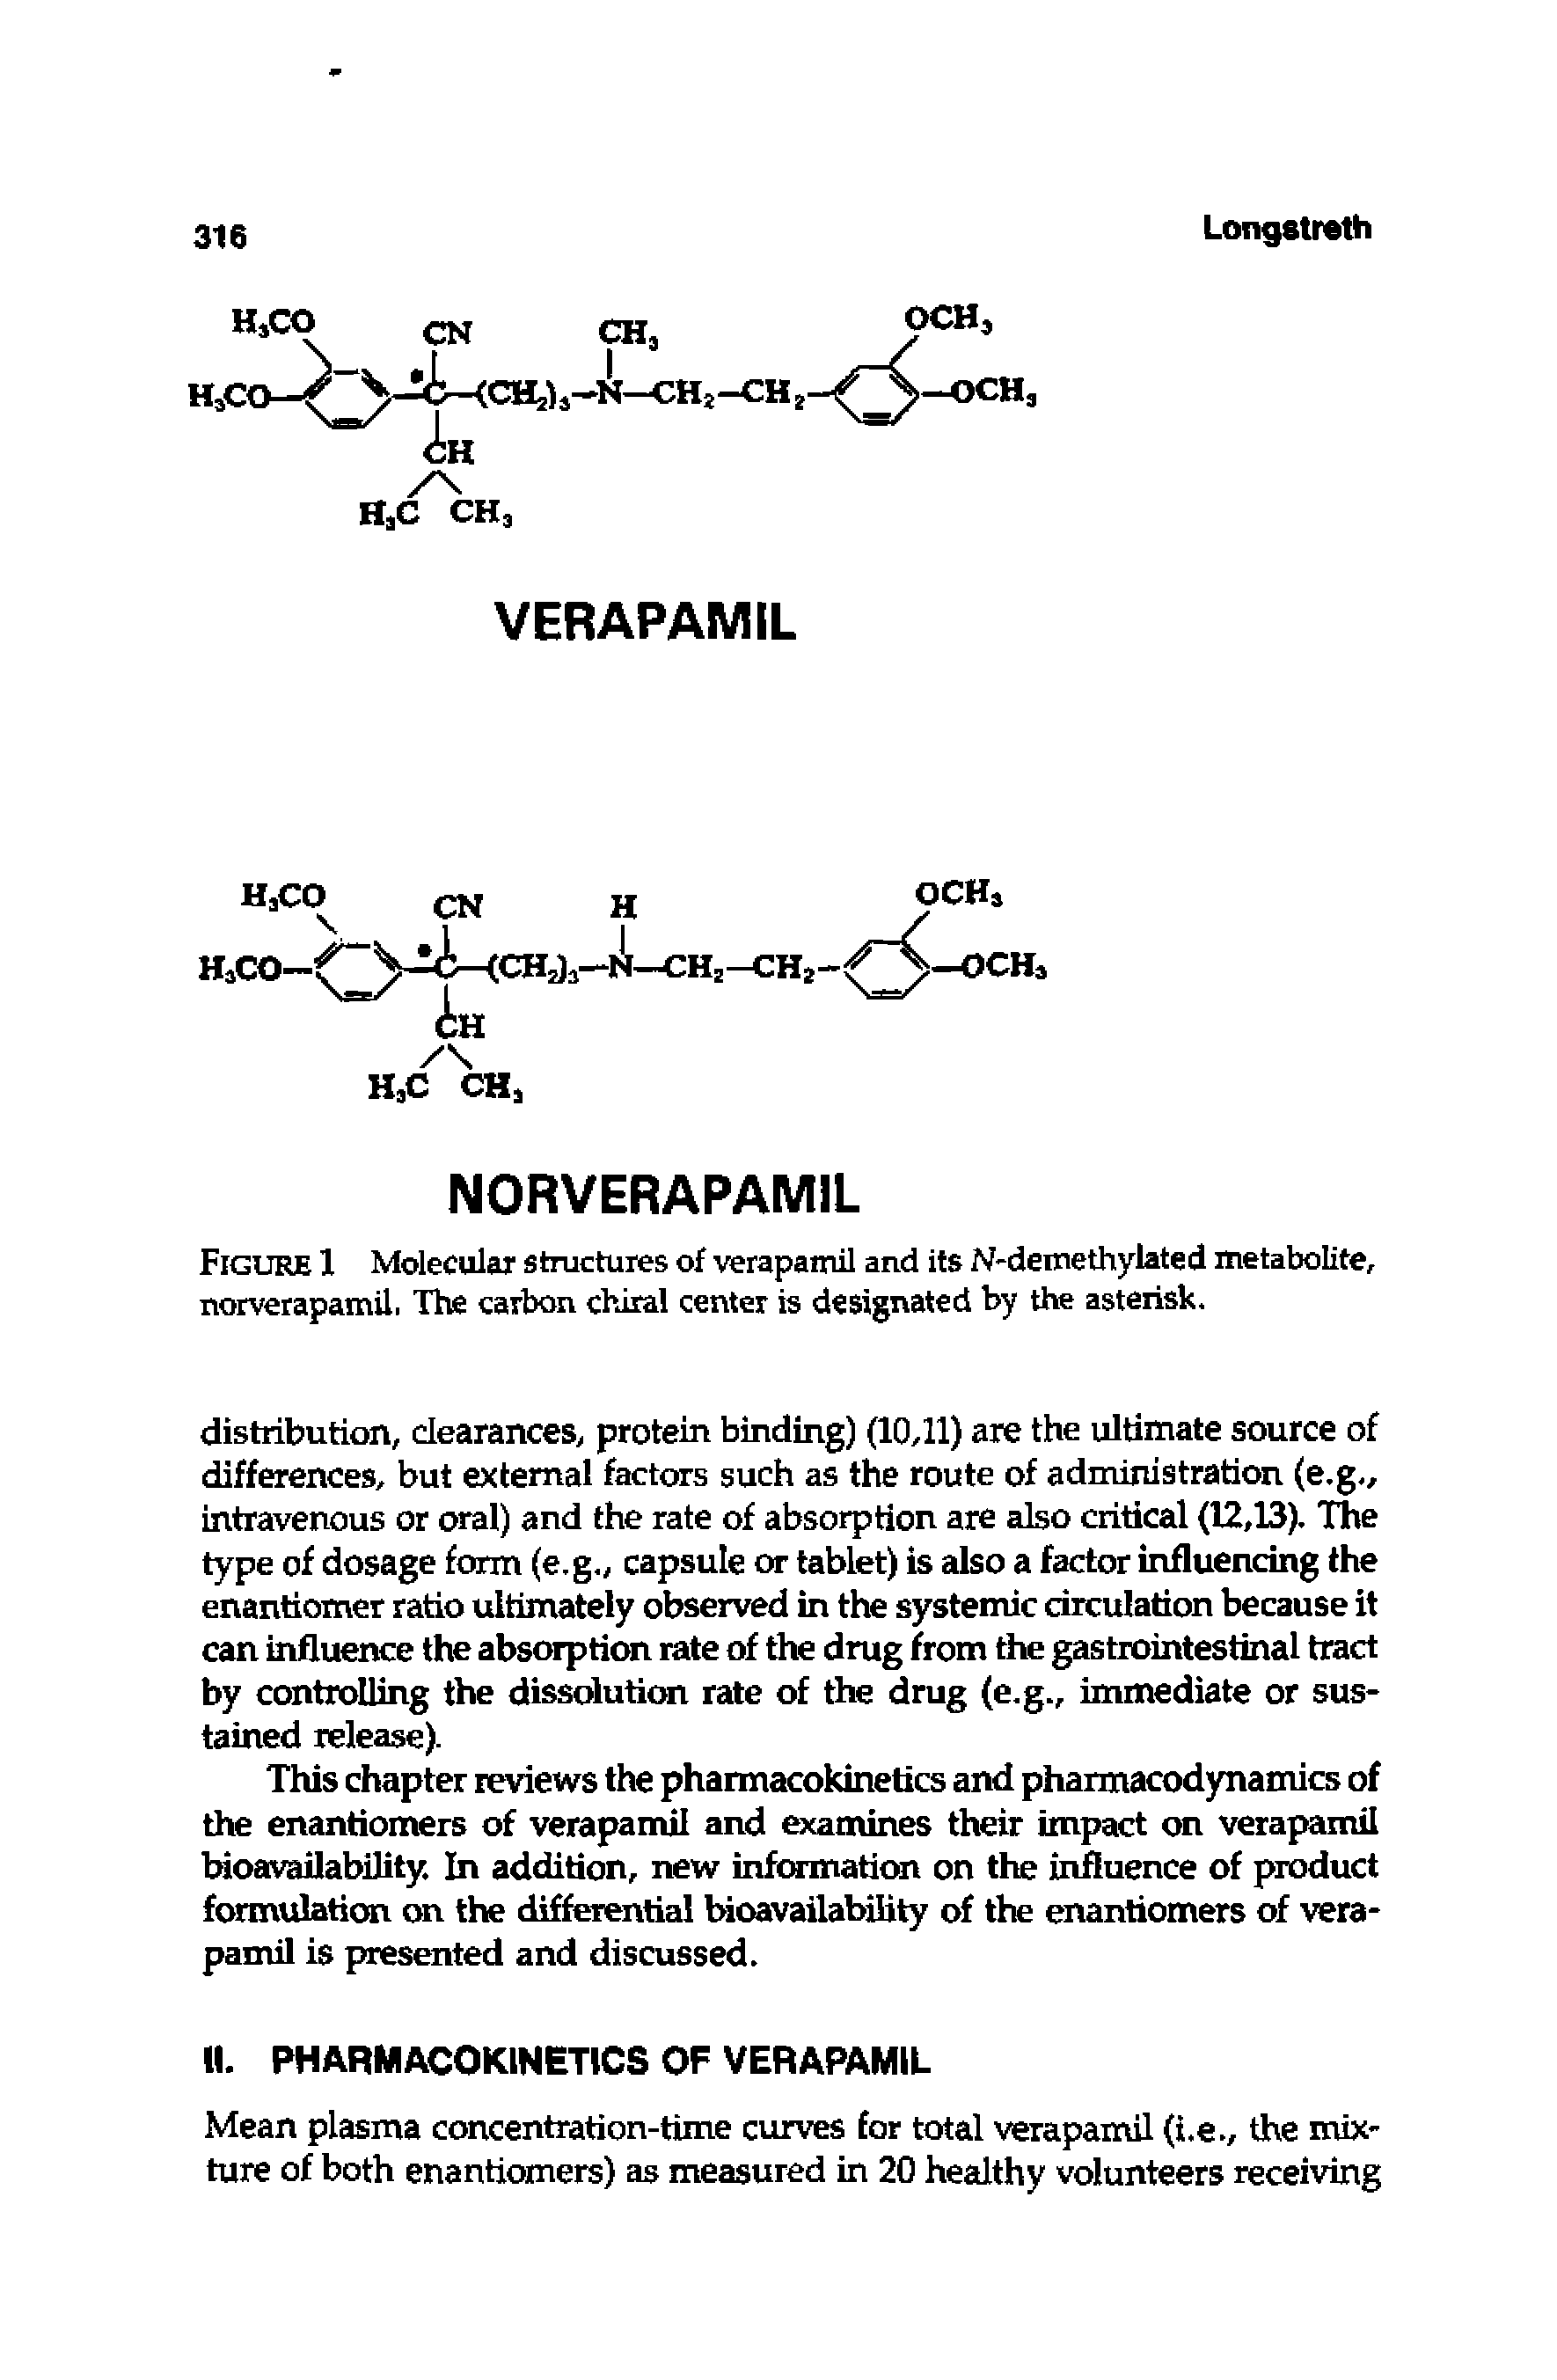 Figure 1 Molecular structures of verapamil and its N-demethyiated metabolite, norverapamil, The carbon chiral center is designated by the asterisk.